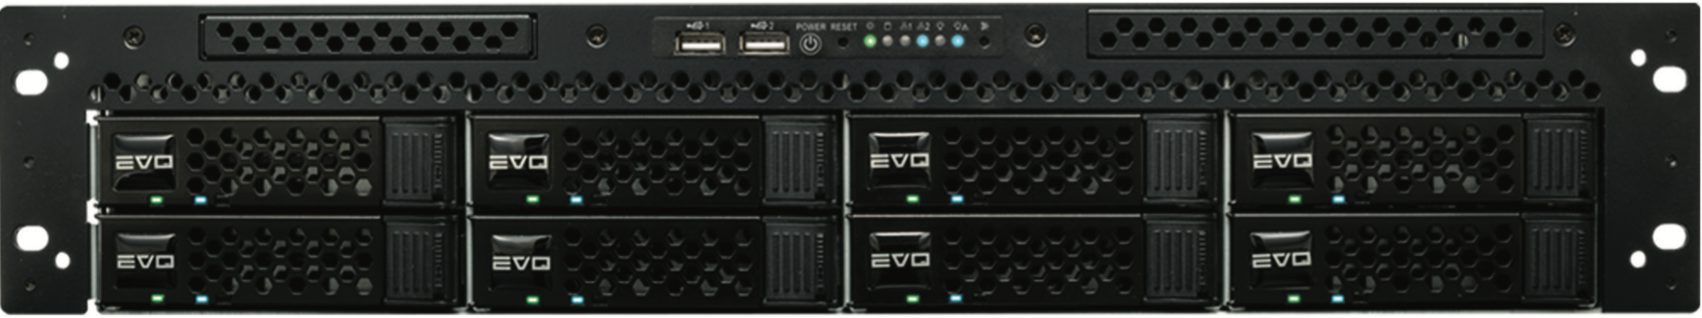 _images/Evo_8bay_front_Evo58.png